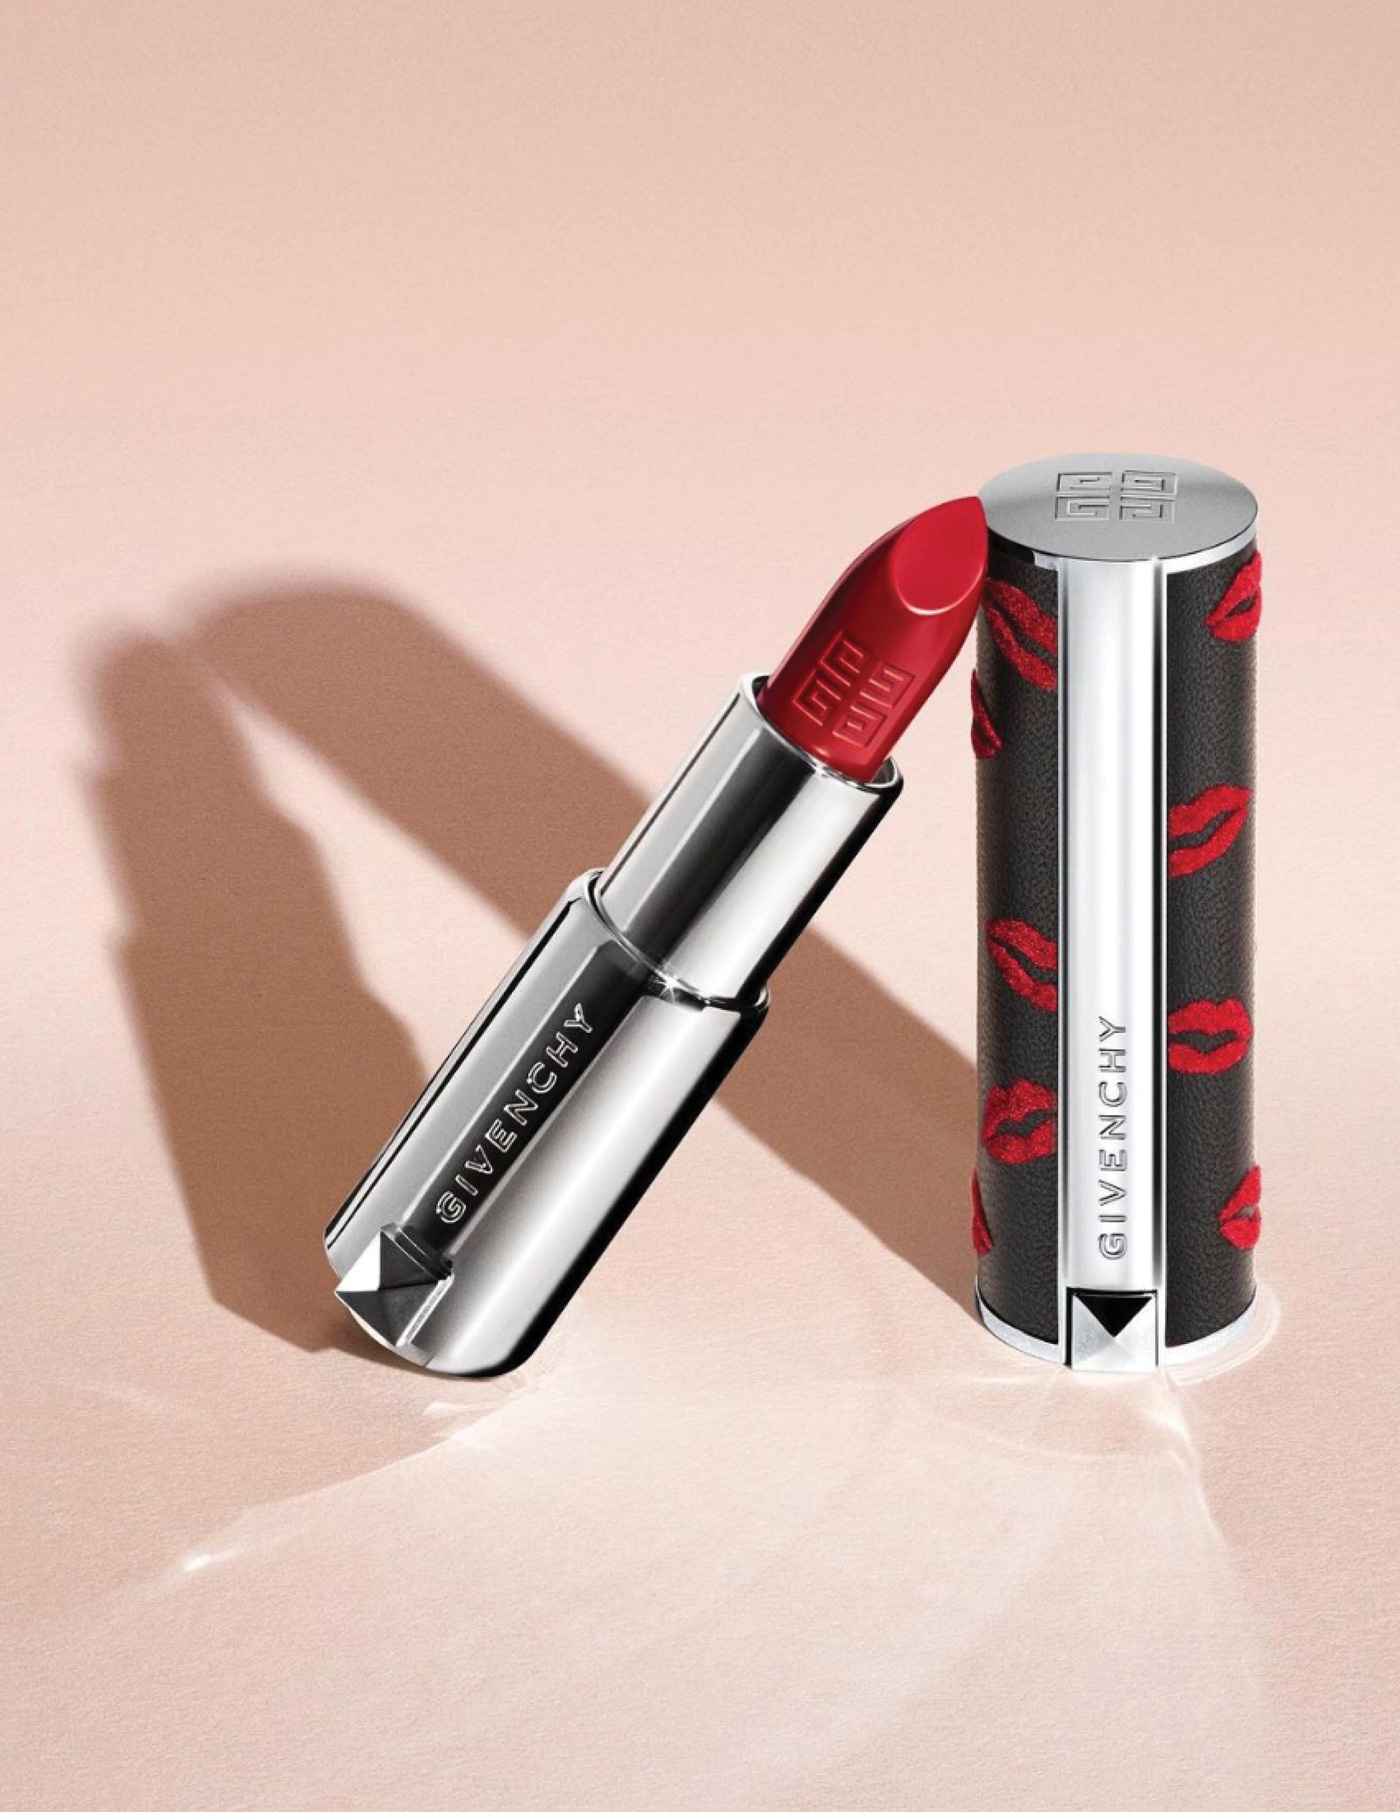 Givenchy – Le Rouge limited edition packaging